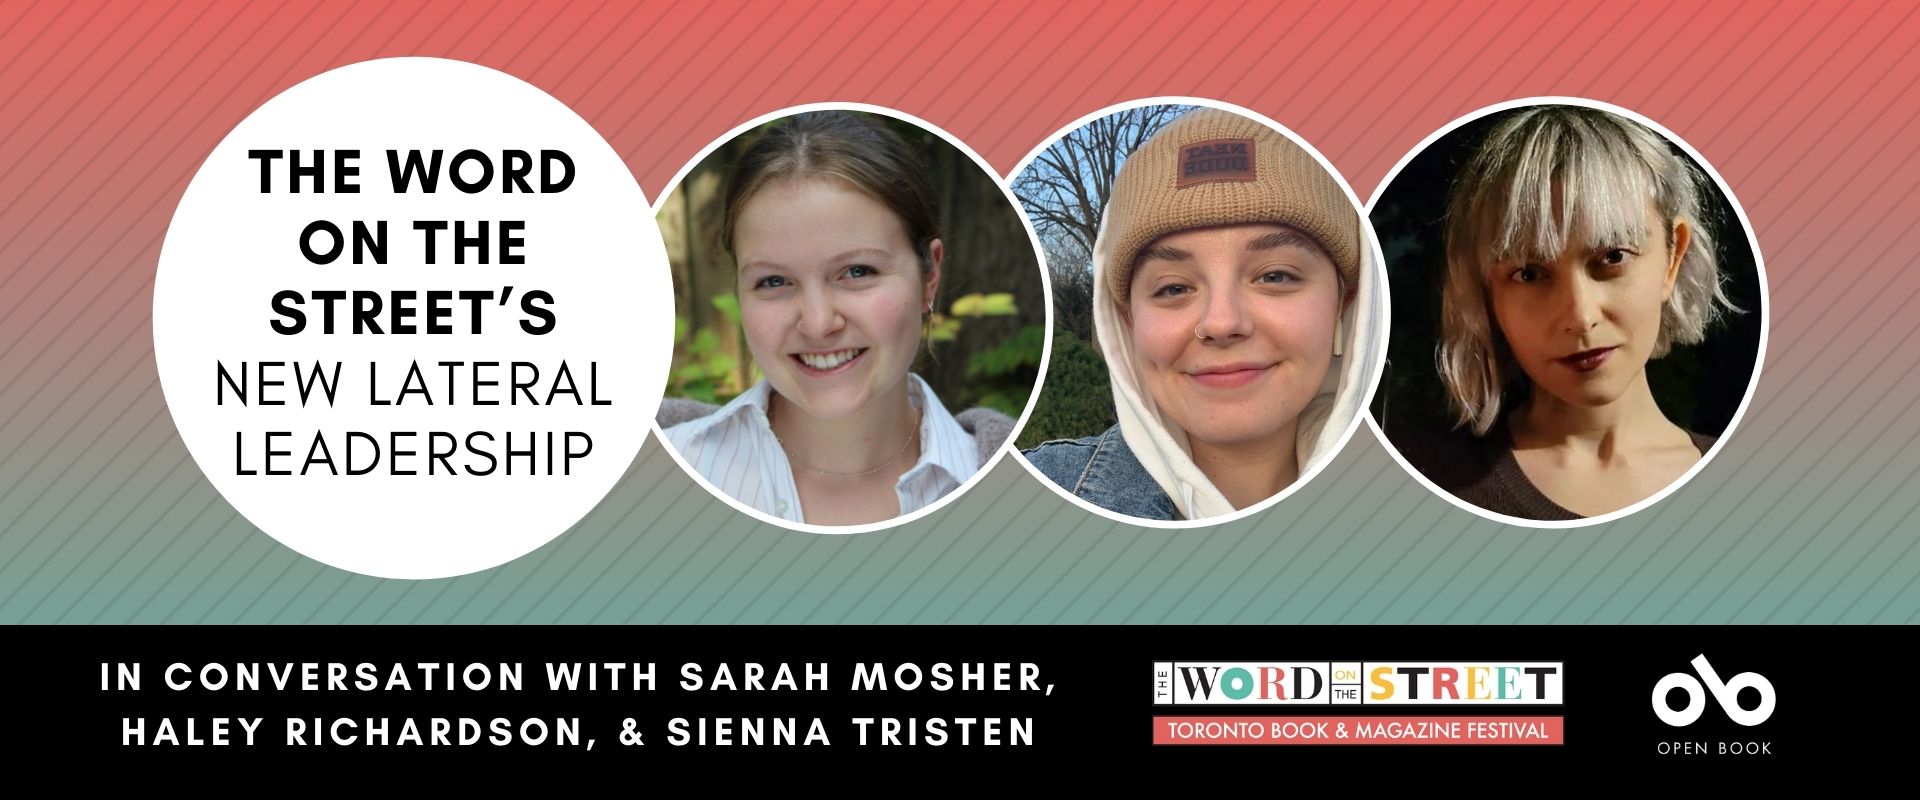 wide graphic with photos of Sarah Mosher, Haley Richardson, Sienna Tristen from The Word on the Street. Word on the Street and Open Book logos at the bottom. Text reads The Word on the Street's New Lateral Leadership. In conversation with Sarah Mosher, Haley Richardson, & Sienna Tristen.